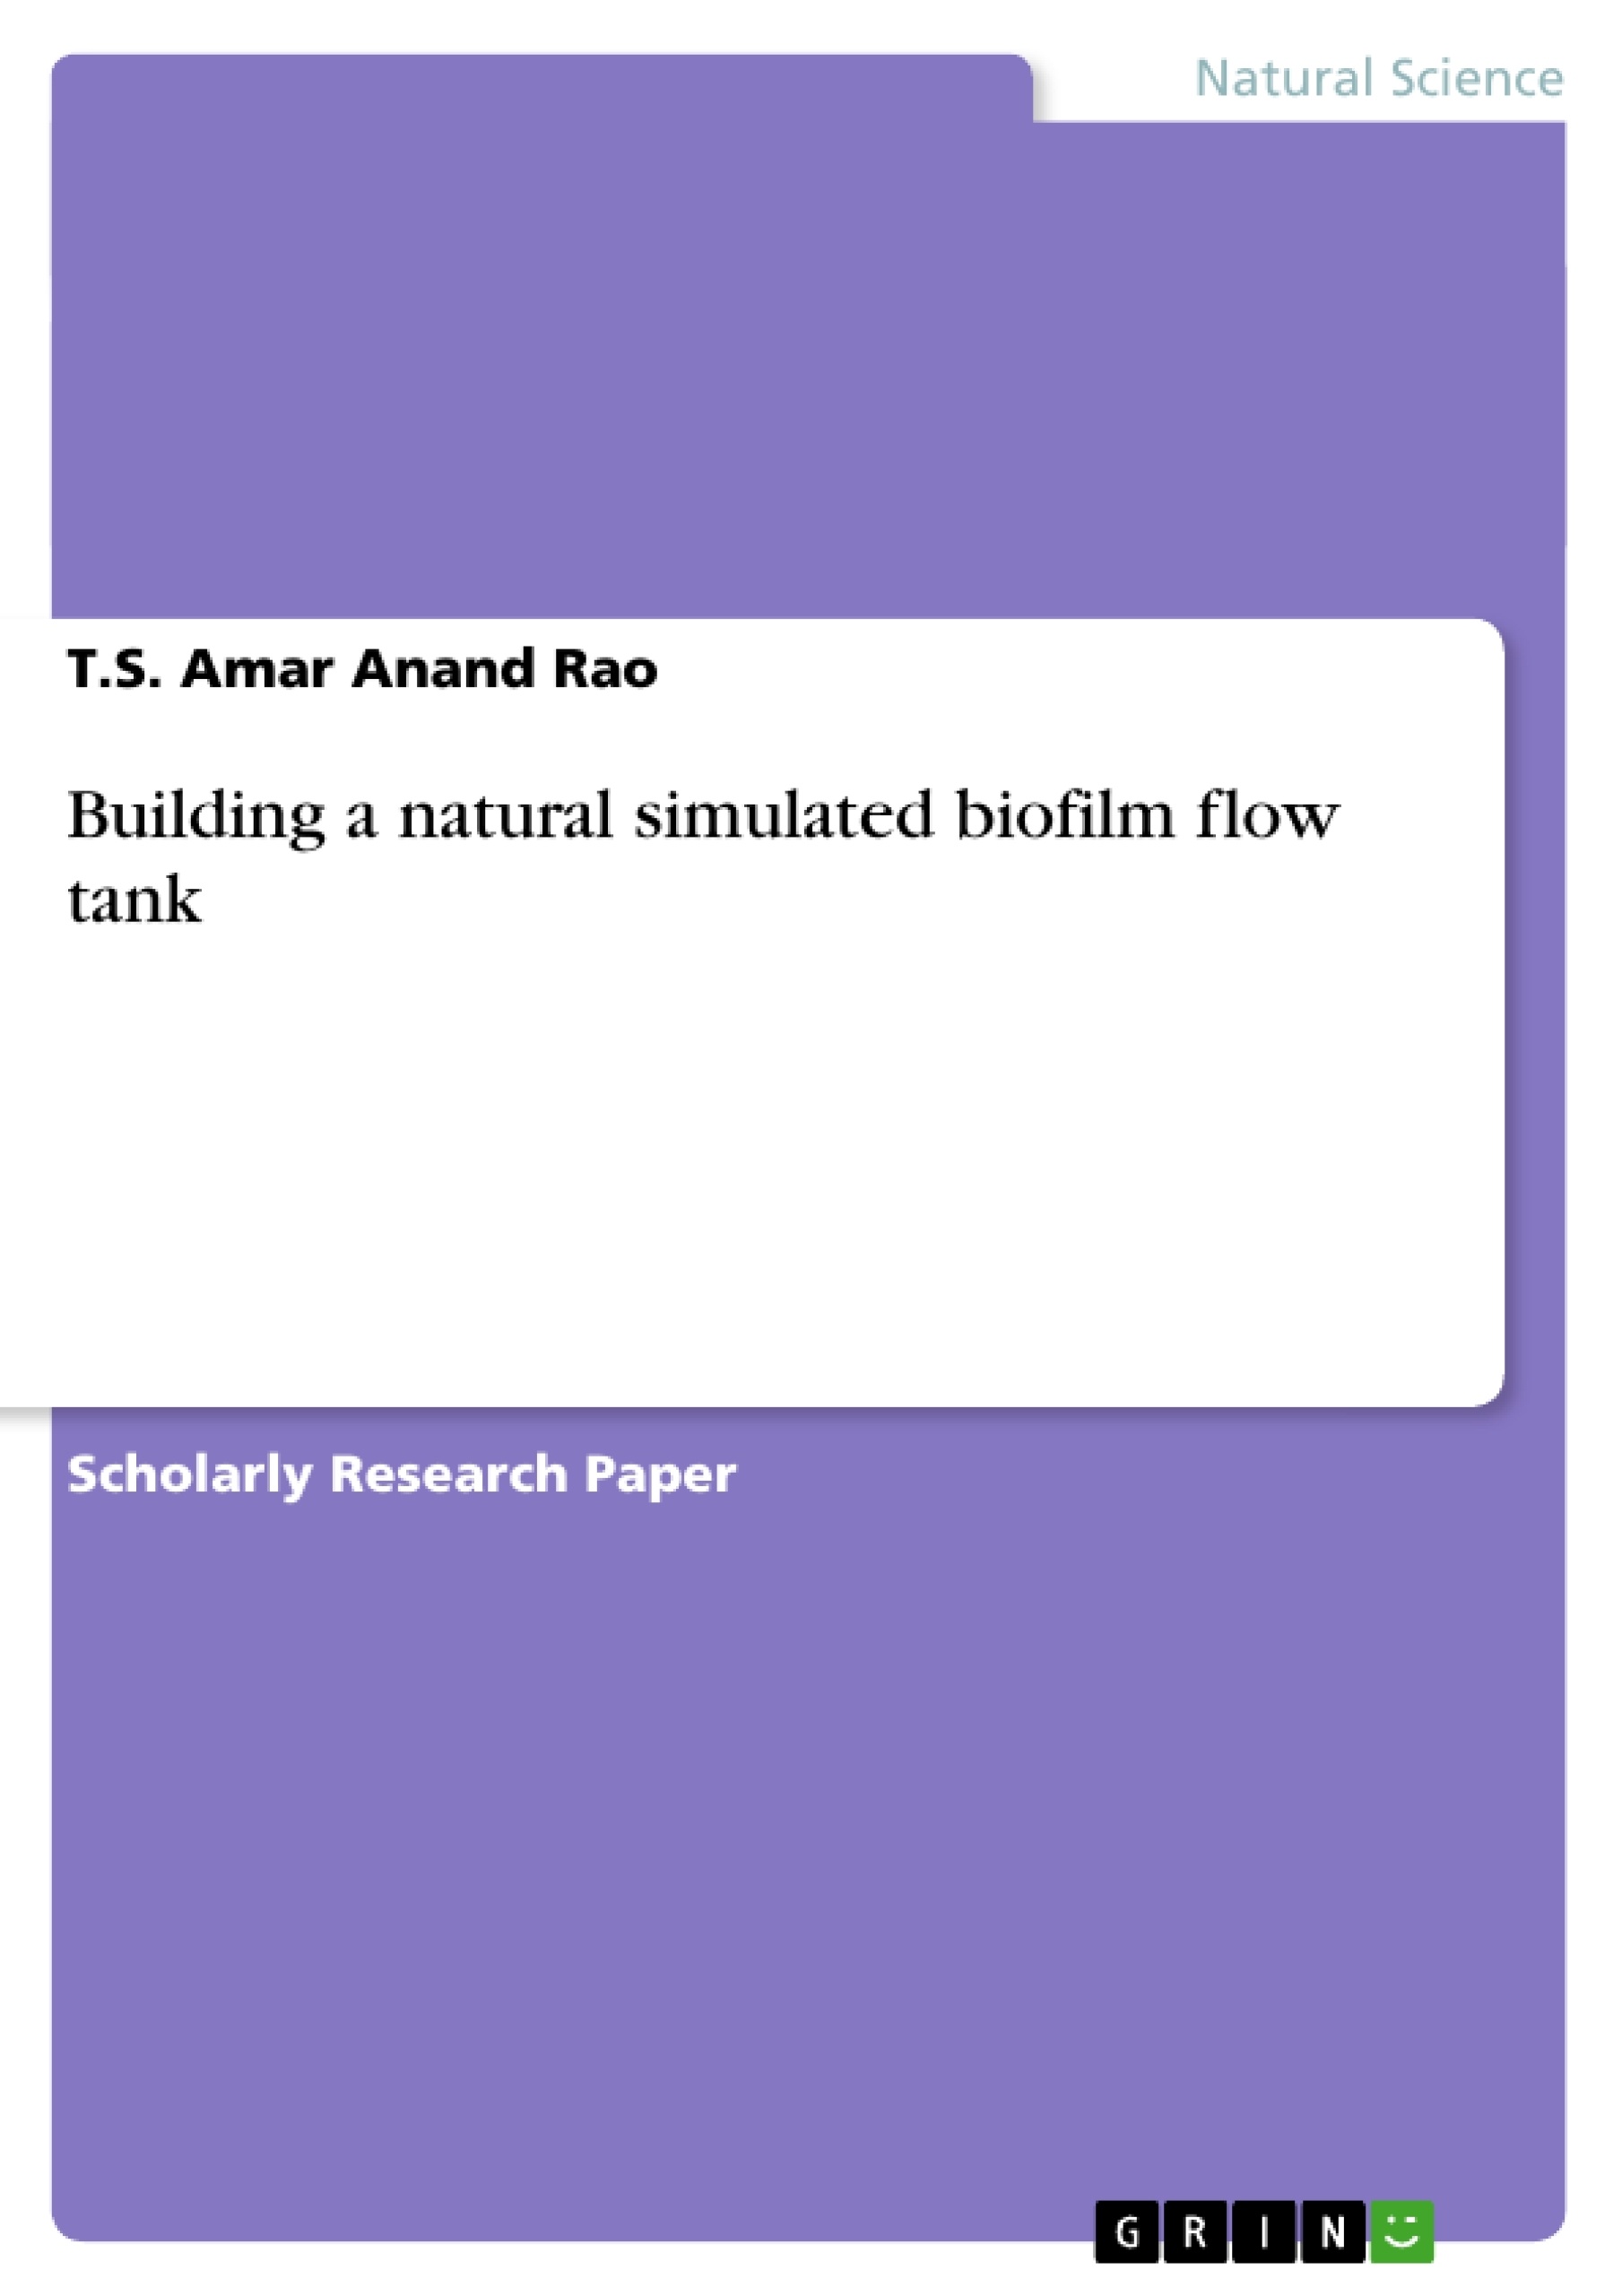 Title: Building a natural simulated biofilm flow tank